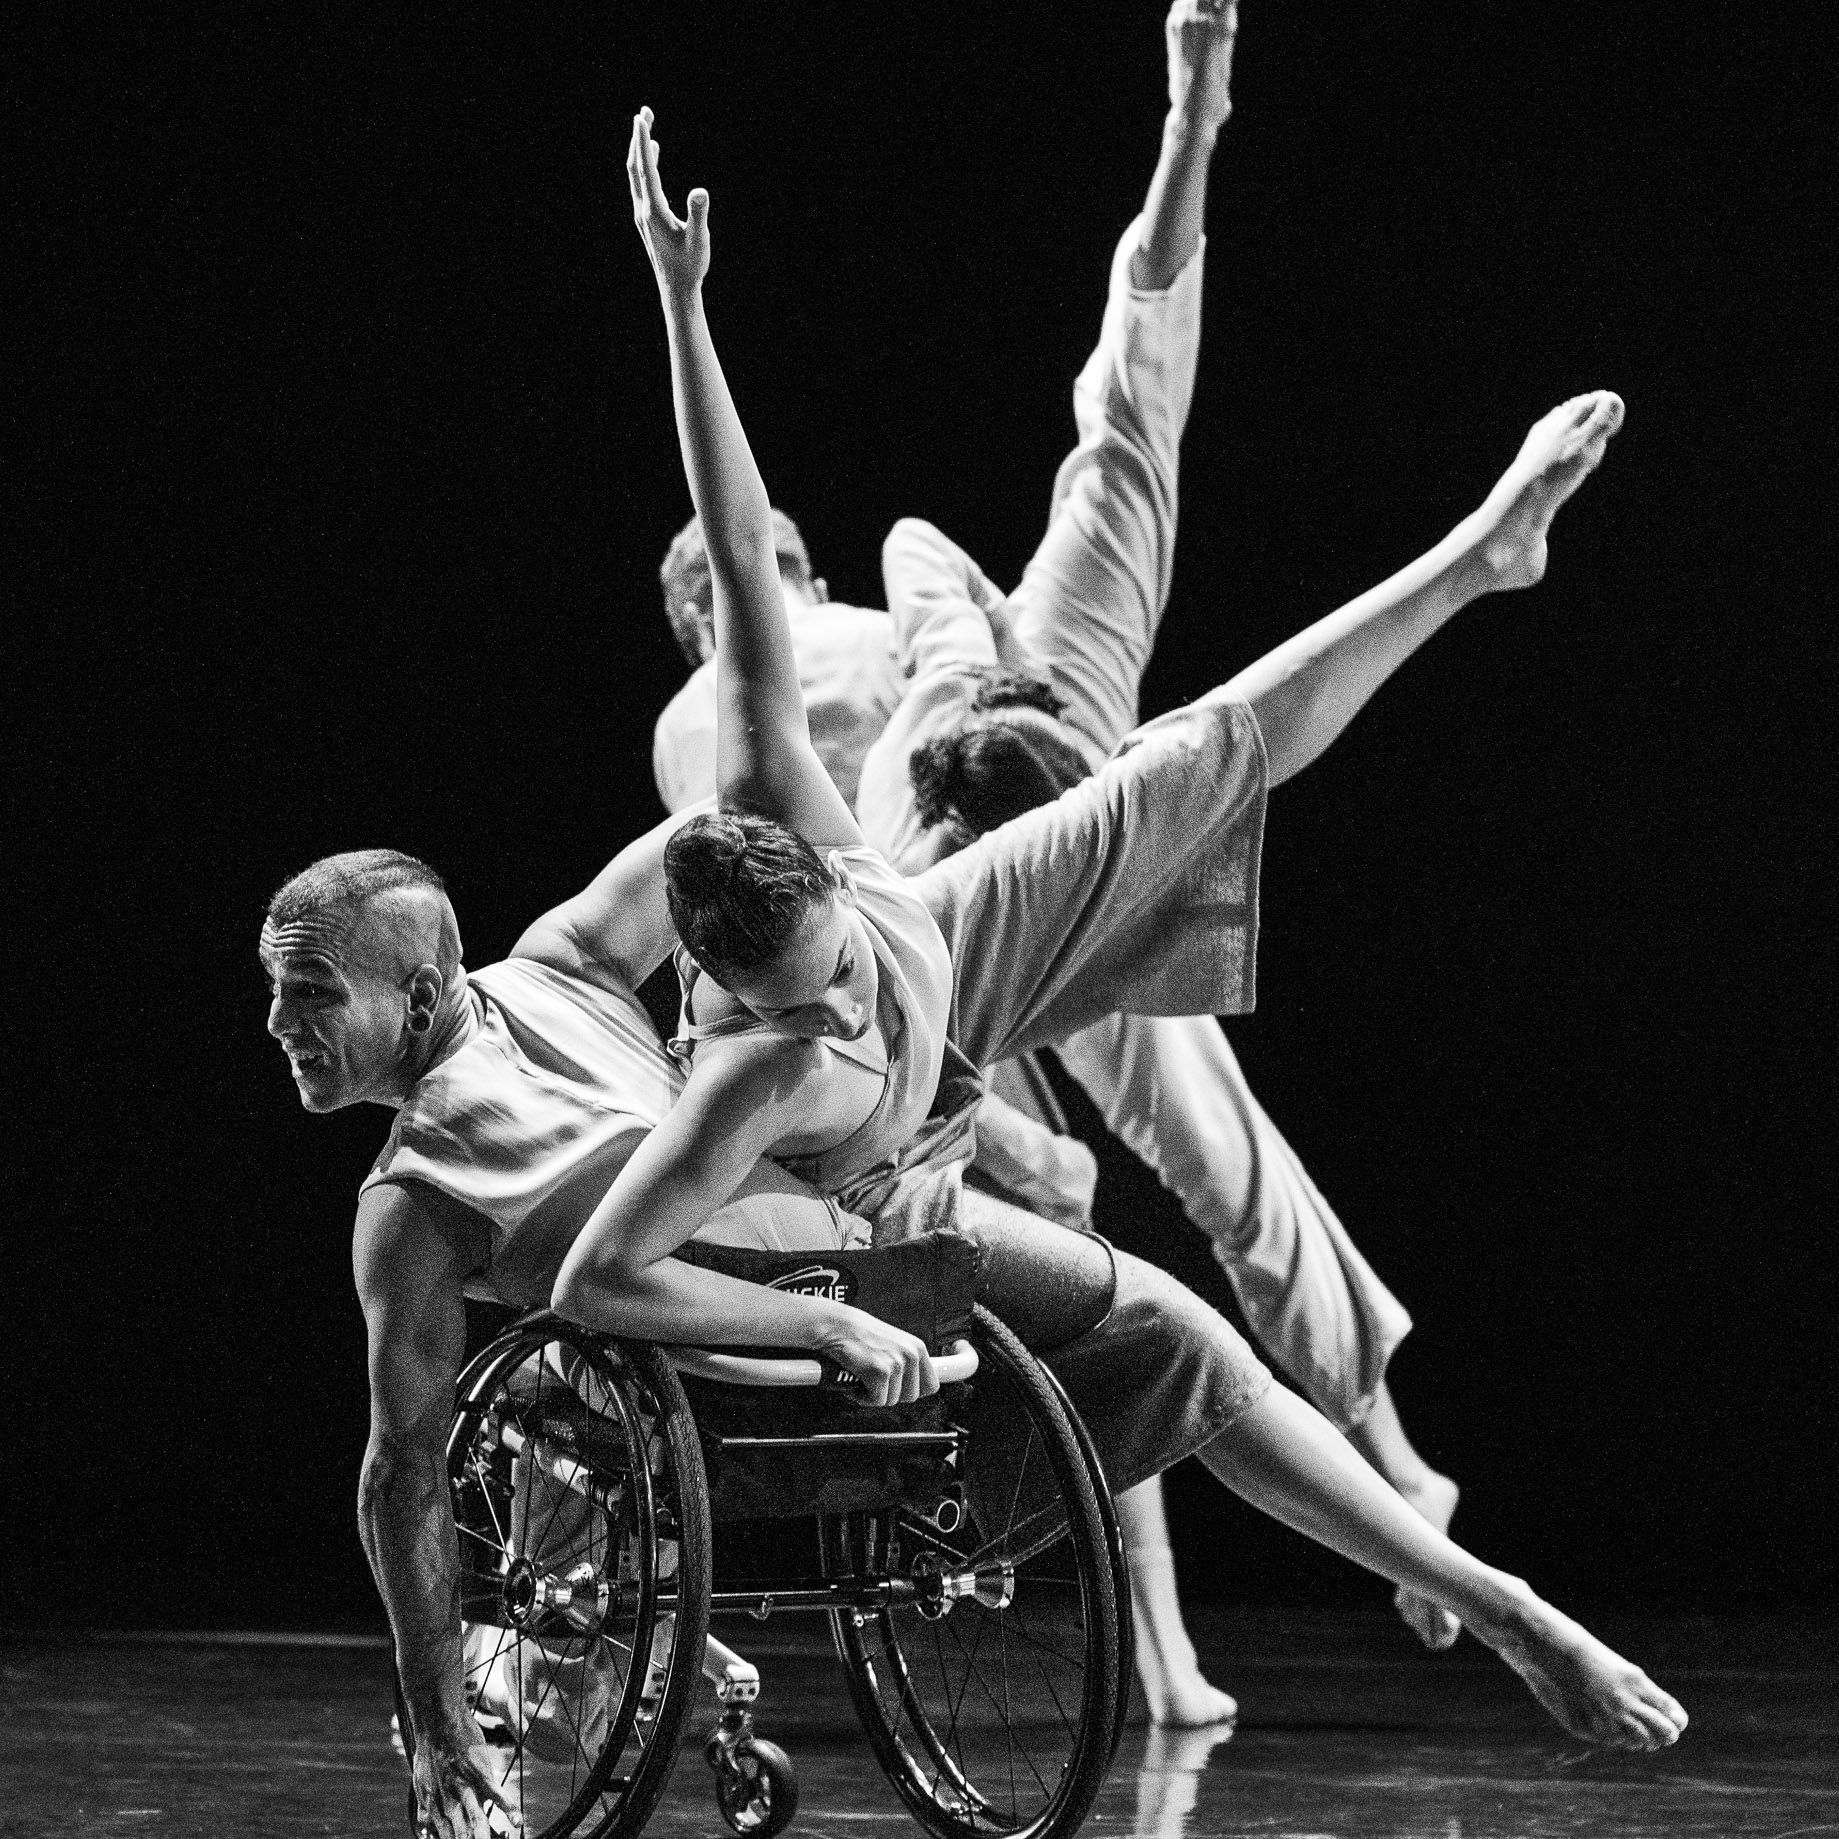 In a black and white photo, Janpi tilts their torso to the left in their wheelchair, while Zara balances in a side tilt on Janpi's body & chair with two legs and one arm extended outwards. David and Alaja perform the same movements behind them both.